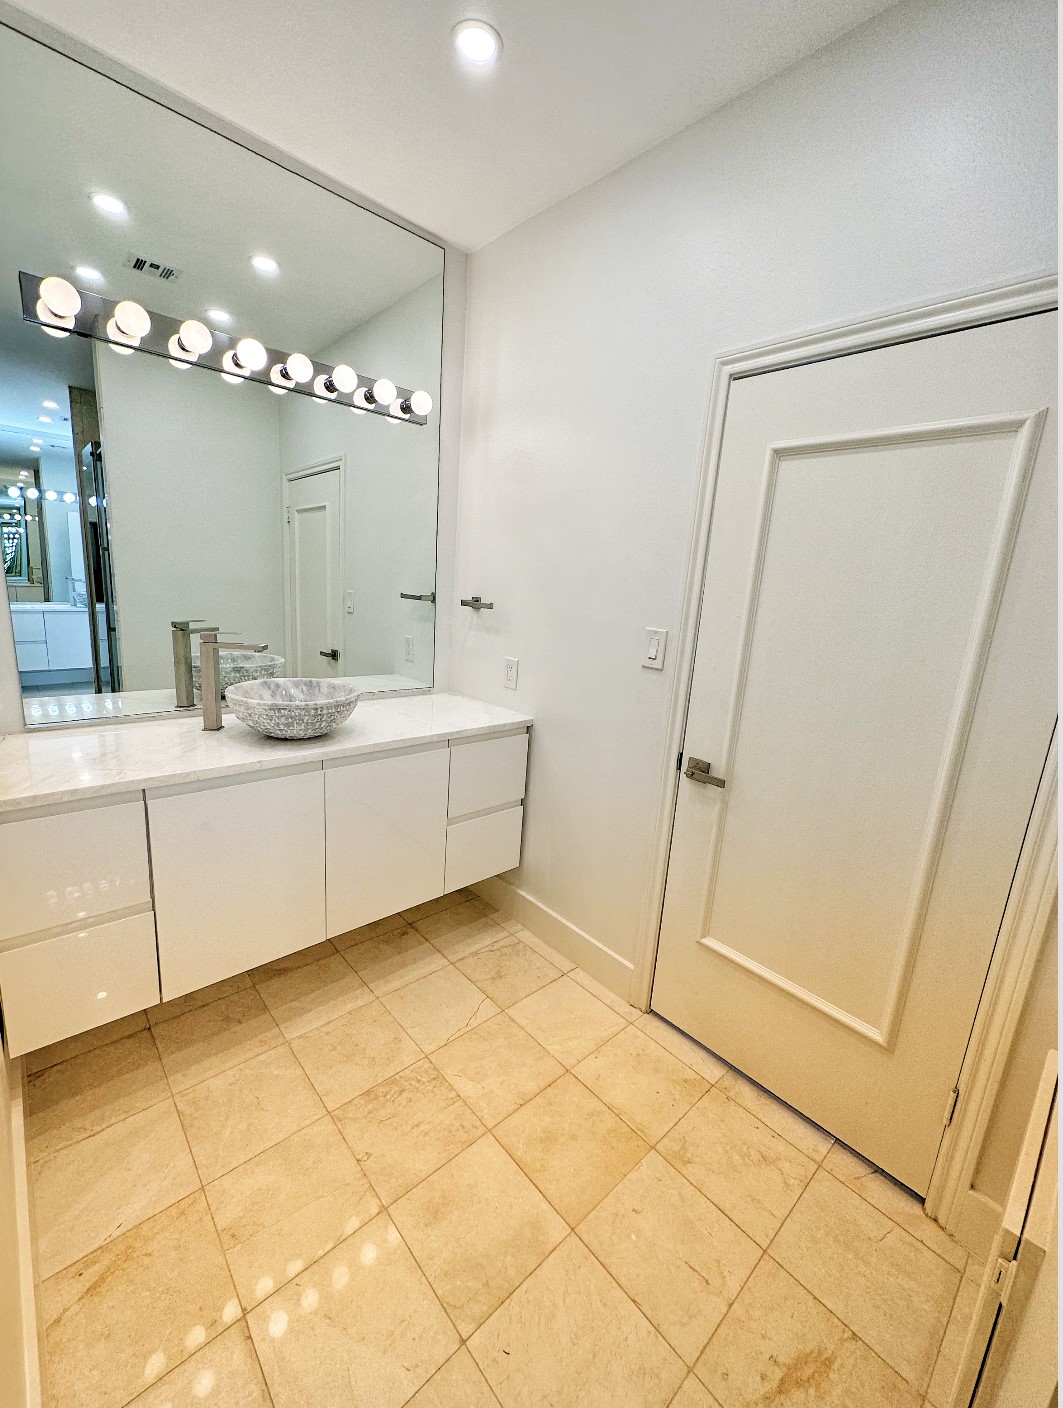 2 of 2 primary bathroom vanities with marble counters and marble flooring